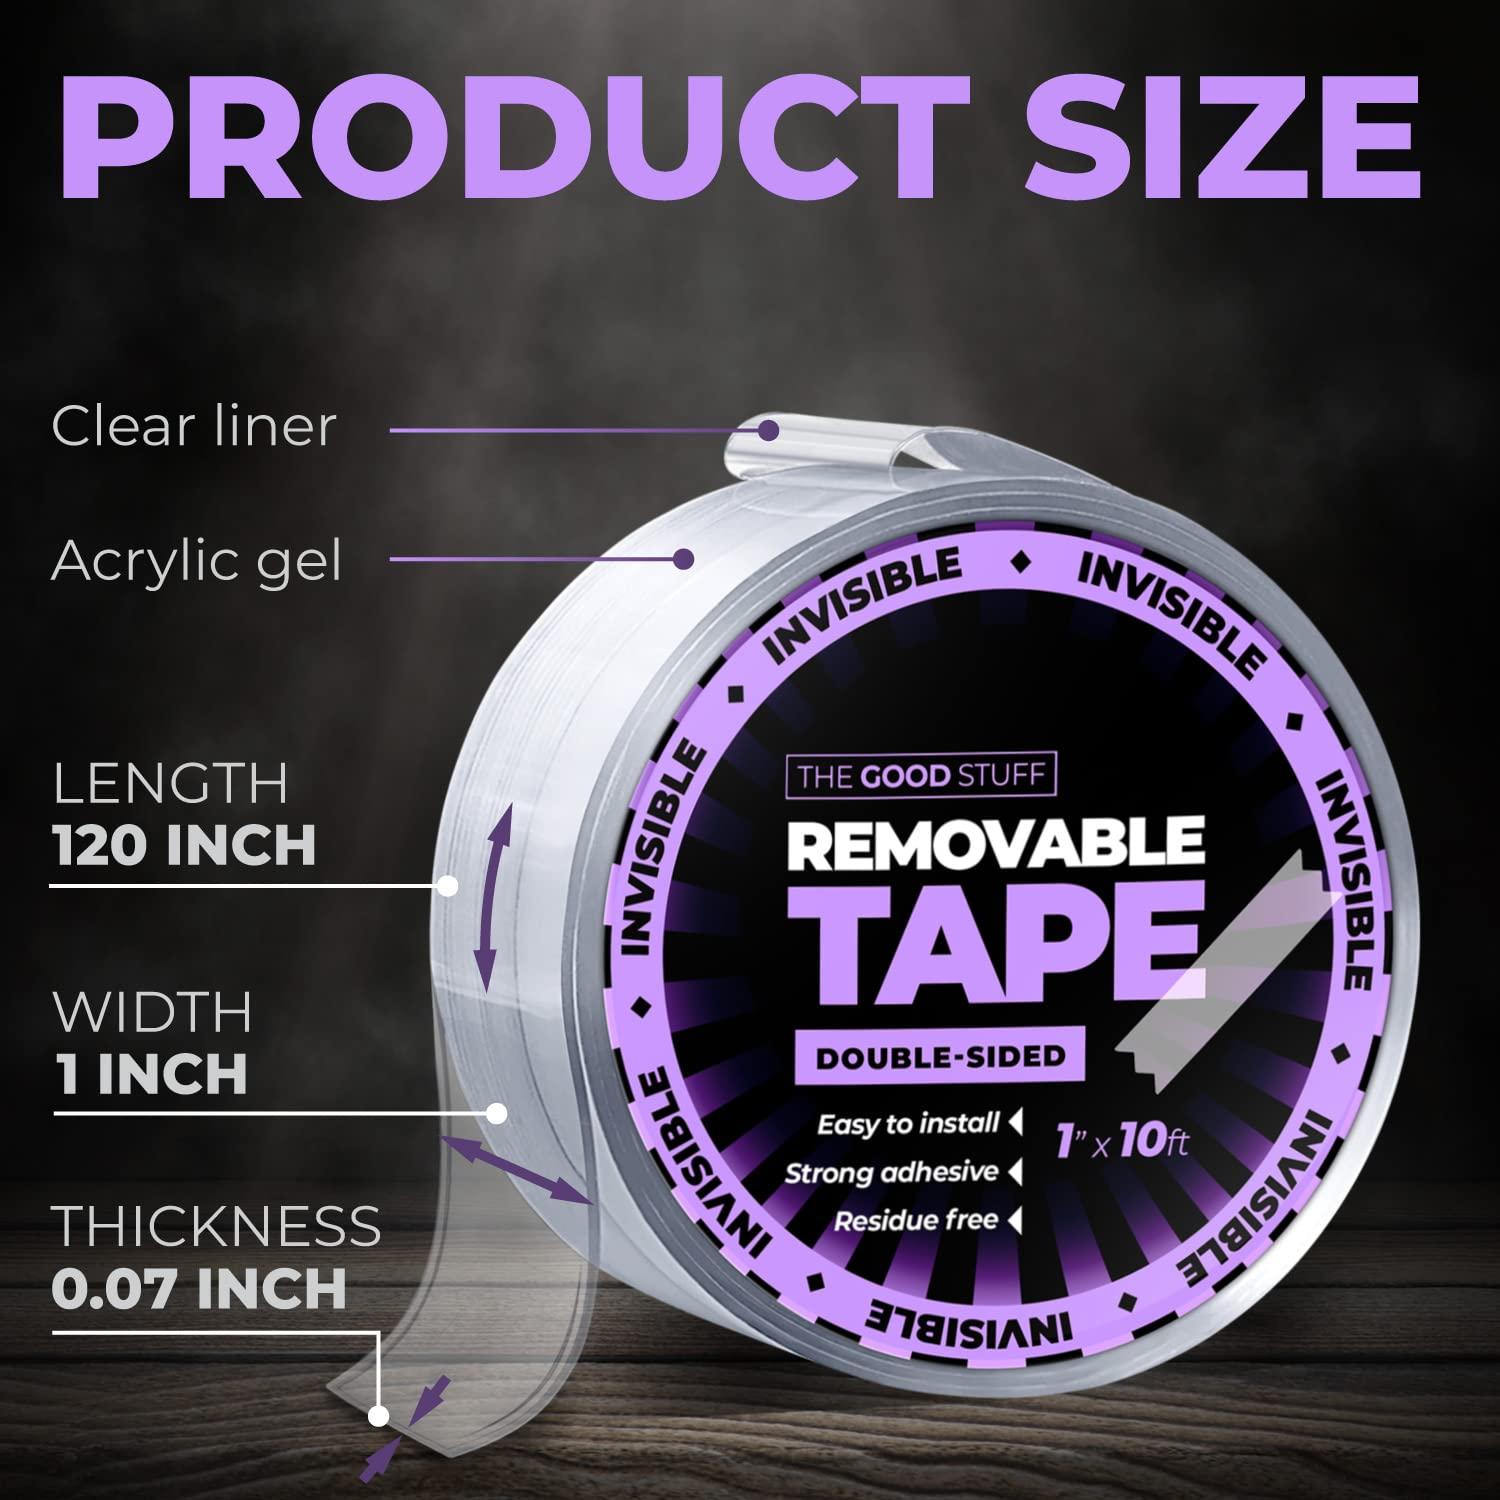 Pro 406 Double Sided Tape, Clear w/ Liner - 2 x 35yd - Neon